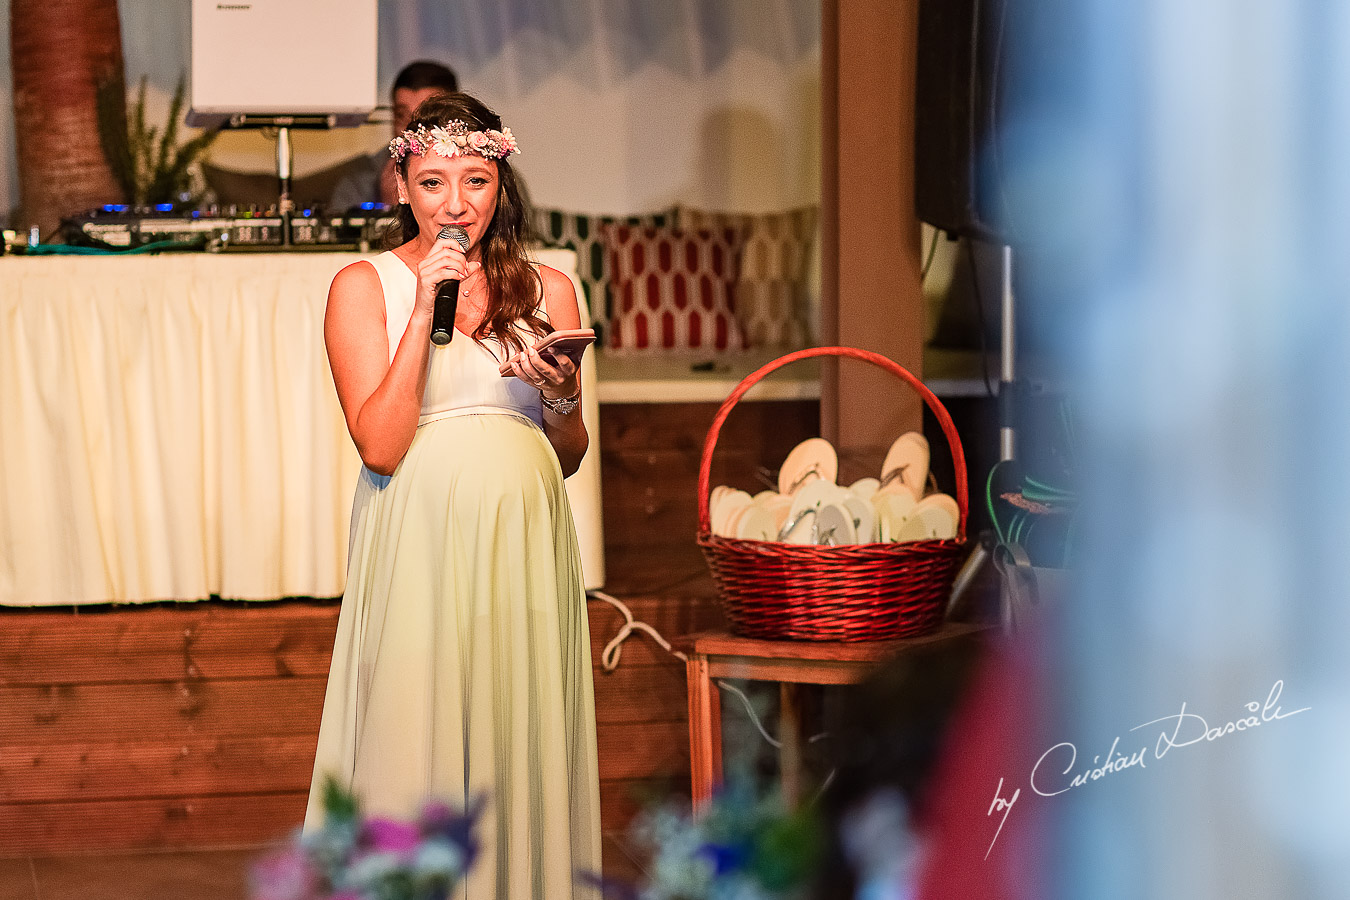 Emotional moments during speeches photographed as part of an Exclusive Wedding photography at Grand Resort Limassol, captured by Cyprus Wedding Photographer Cristian Dascalu.